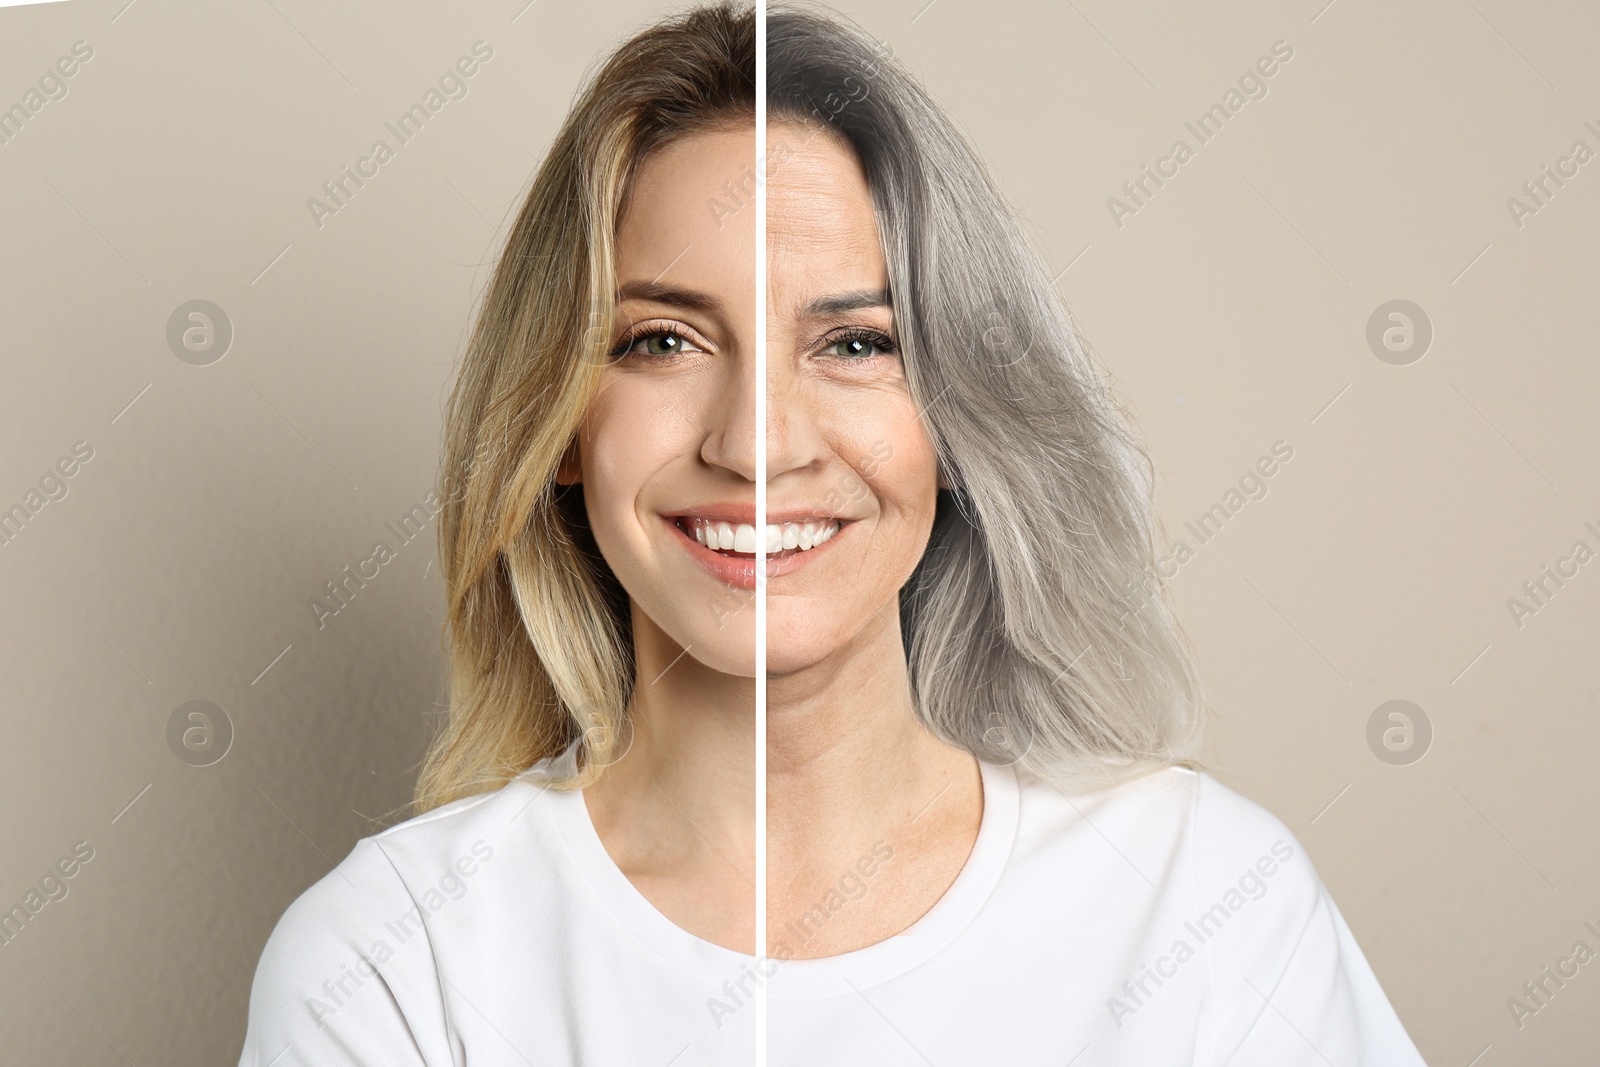 Image of Changes in appearance during aging. Portrait of woman divided in half to show her in younger and older ages. Collage design on beige background